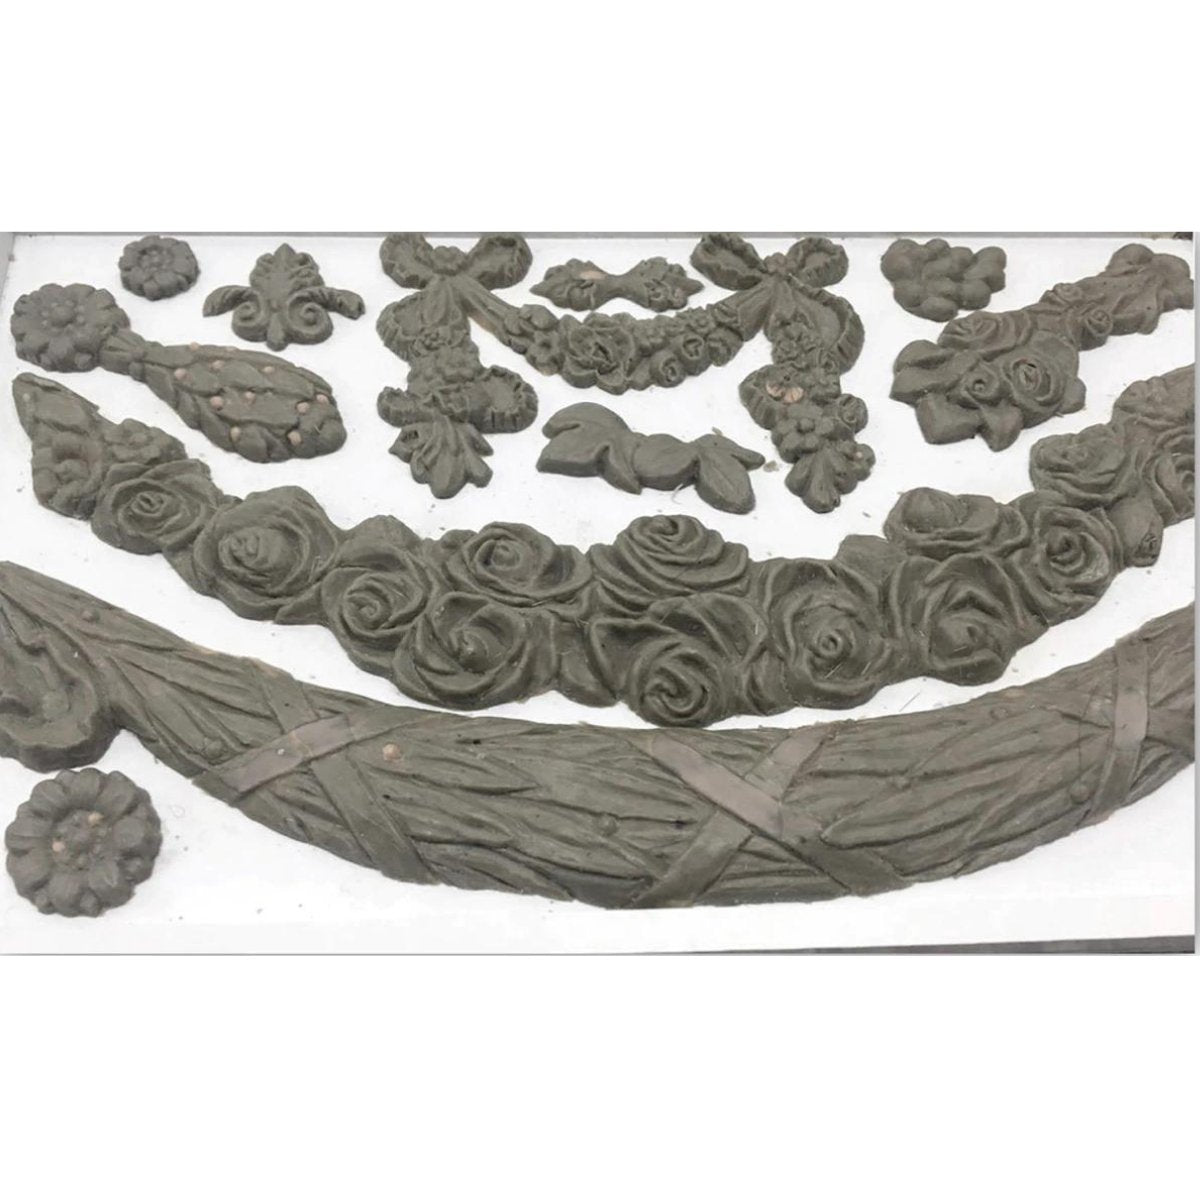 Iron Orchid Designs - Swags Decor Mould - Rustic River Home